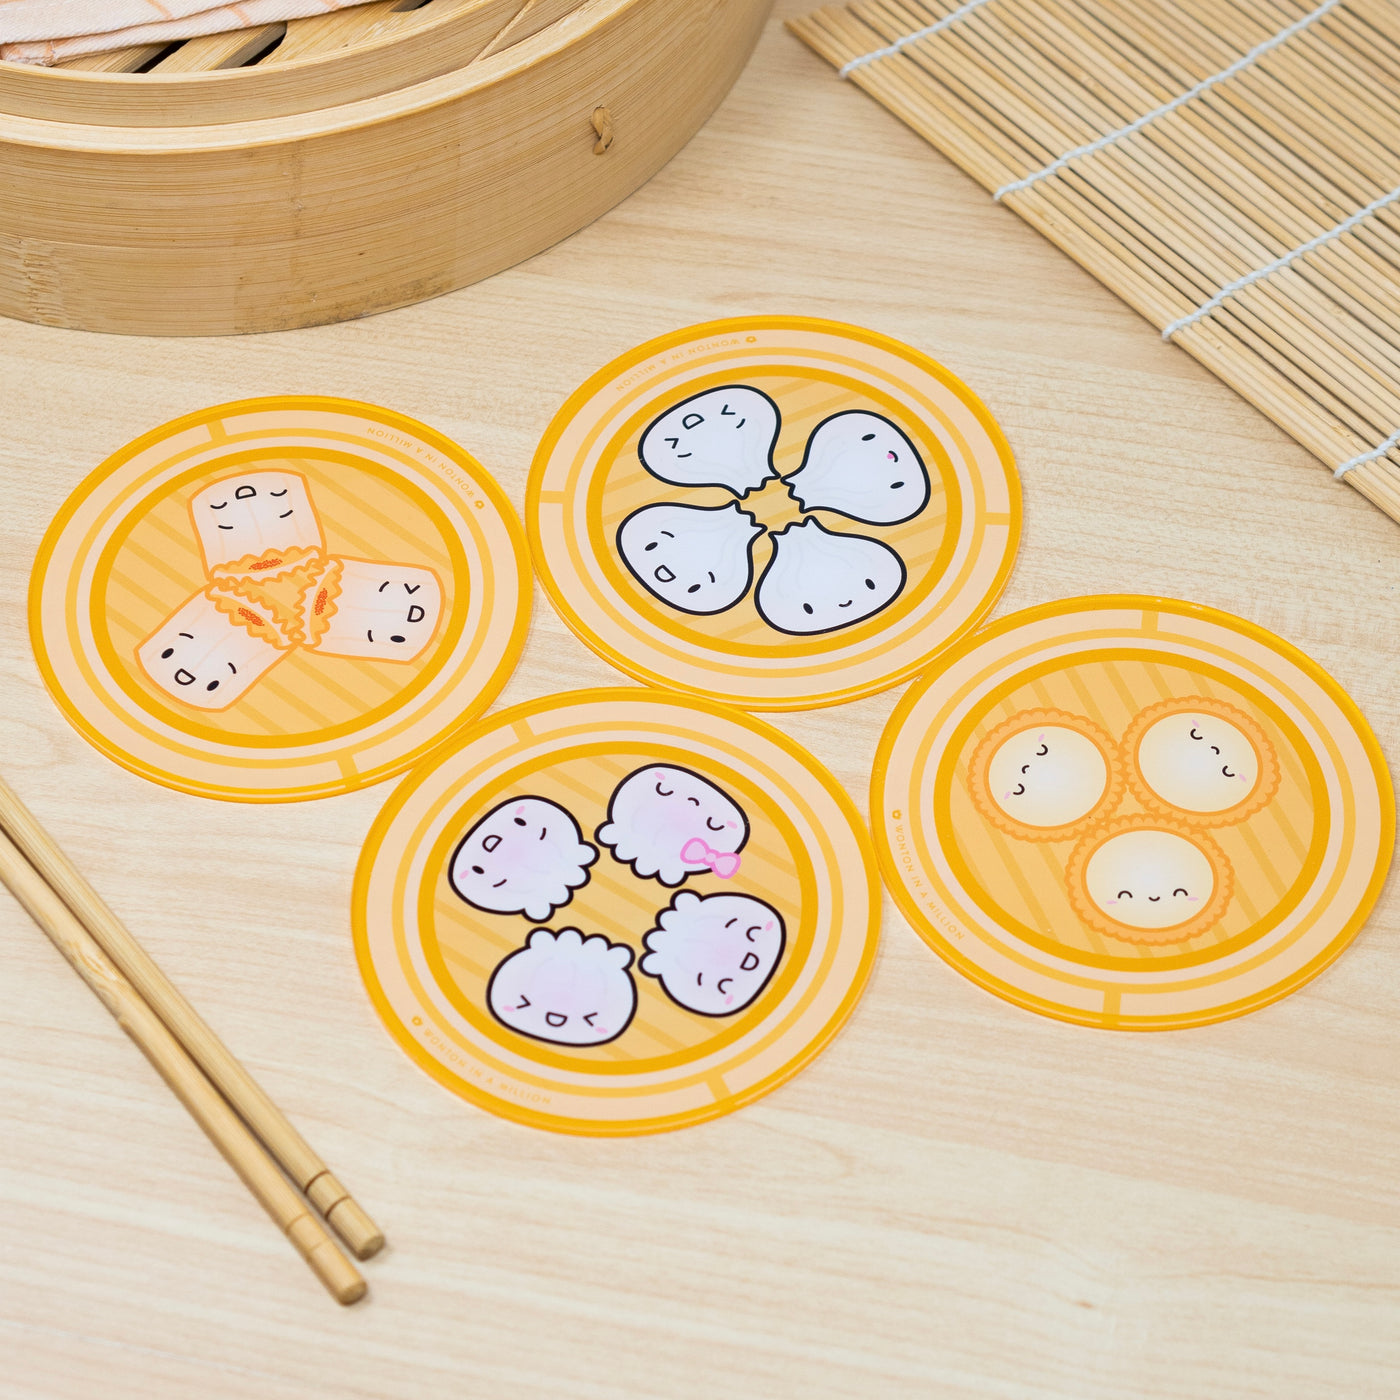 MISC042 | Acrylic Dimsum Steamer Coasters (Set of 4)